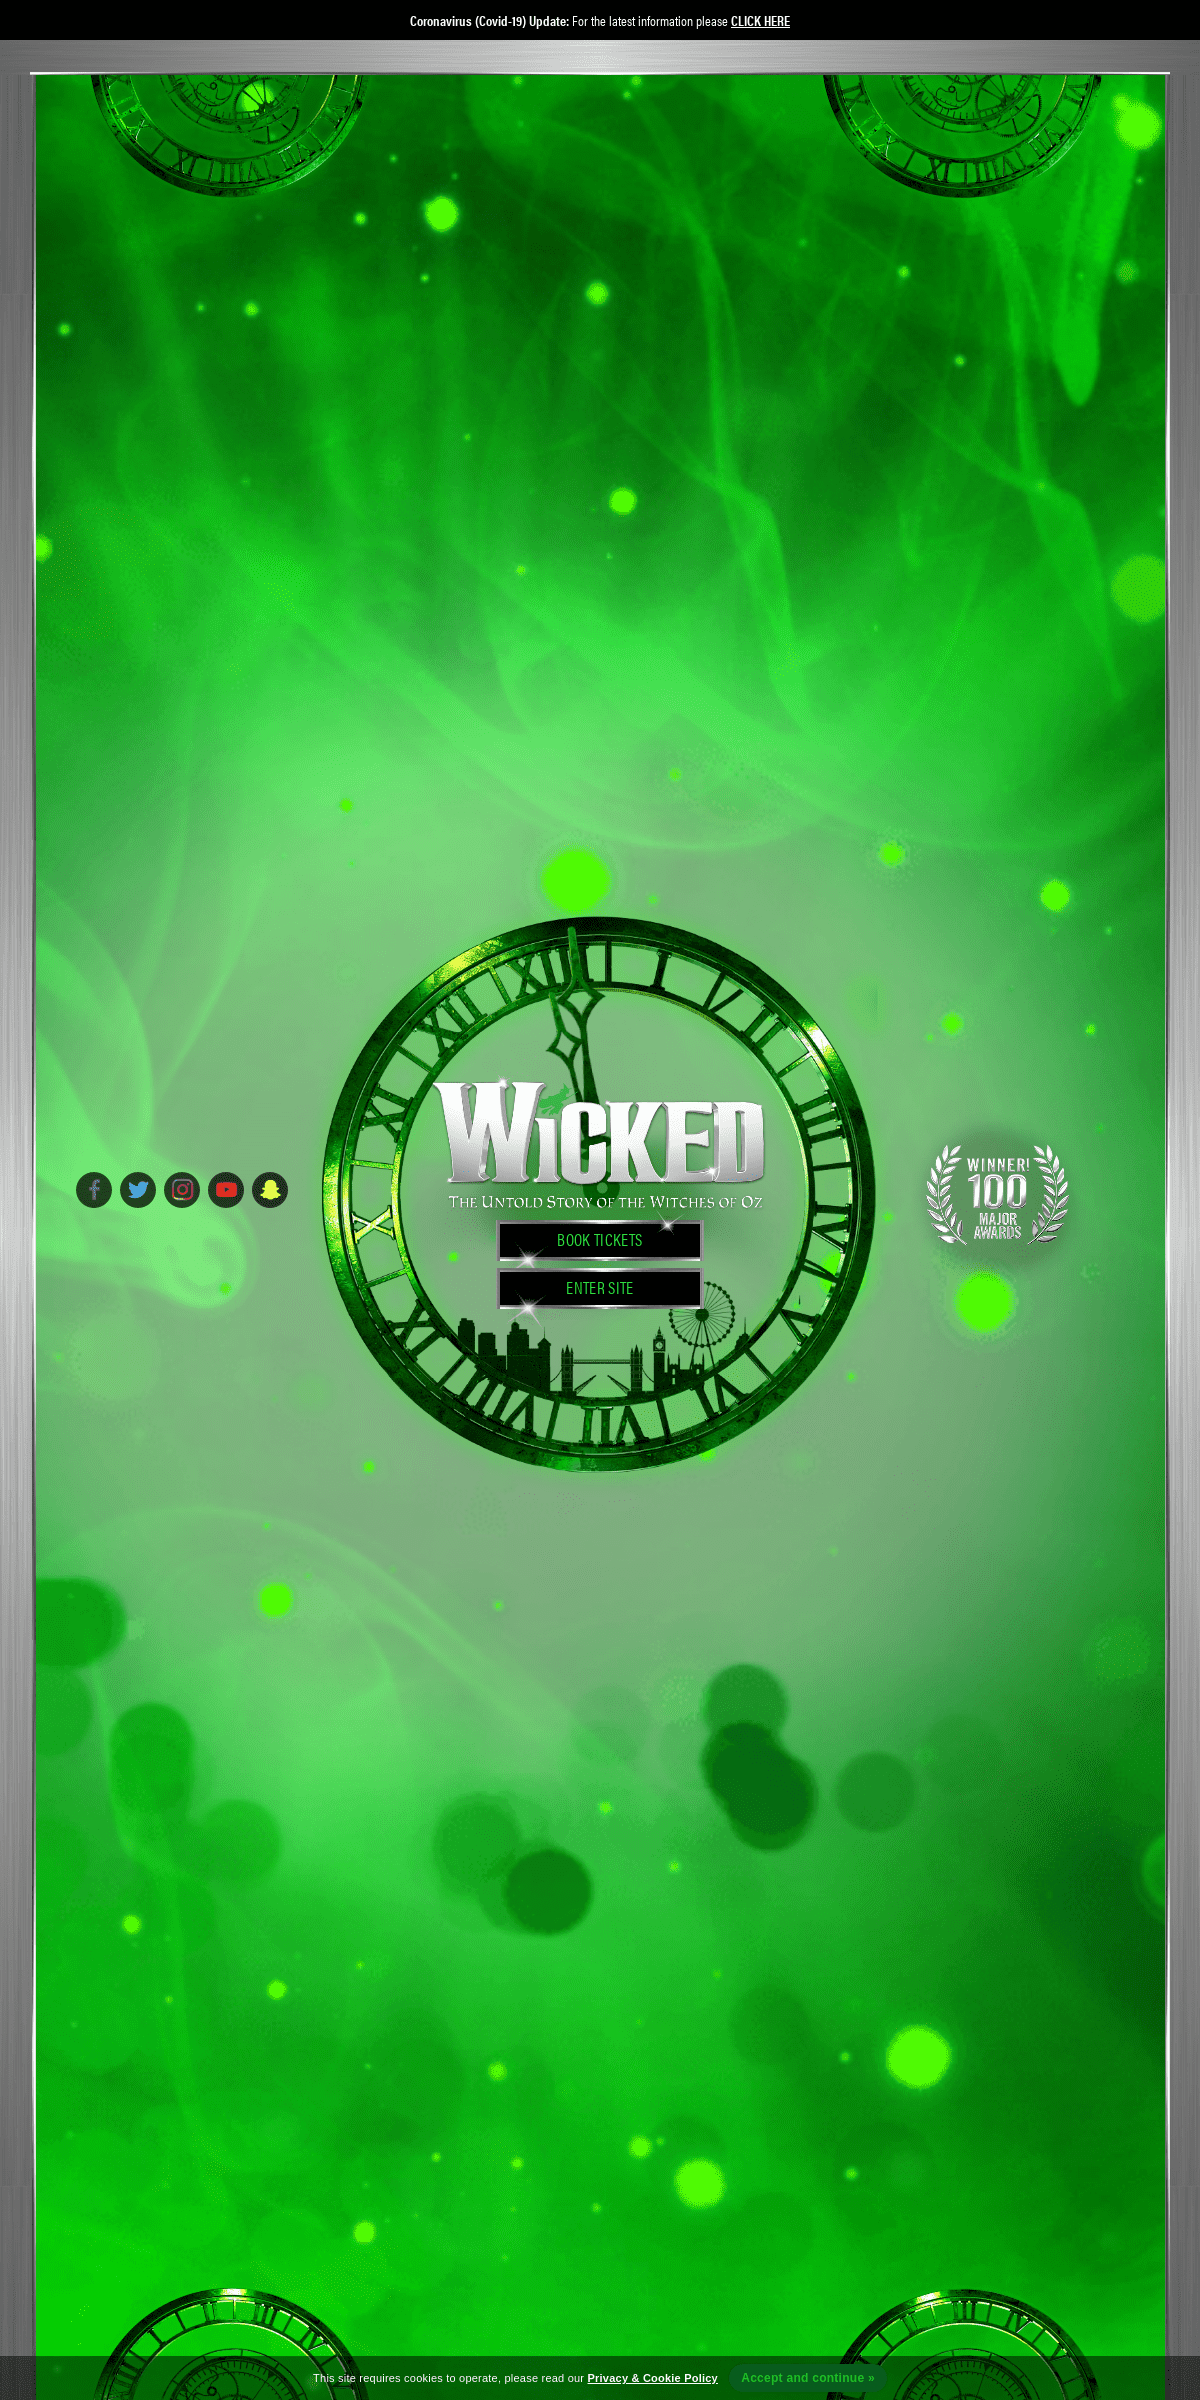 A complete backup of wickedthemusical.co.uk